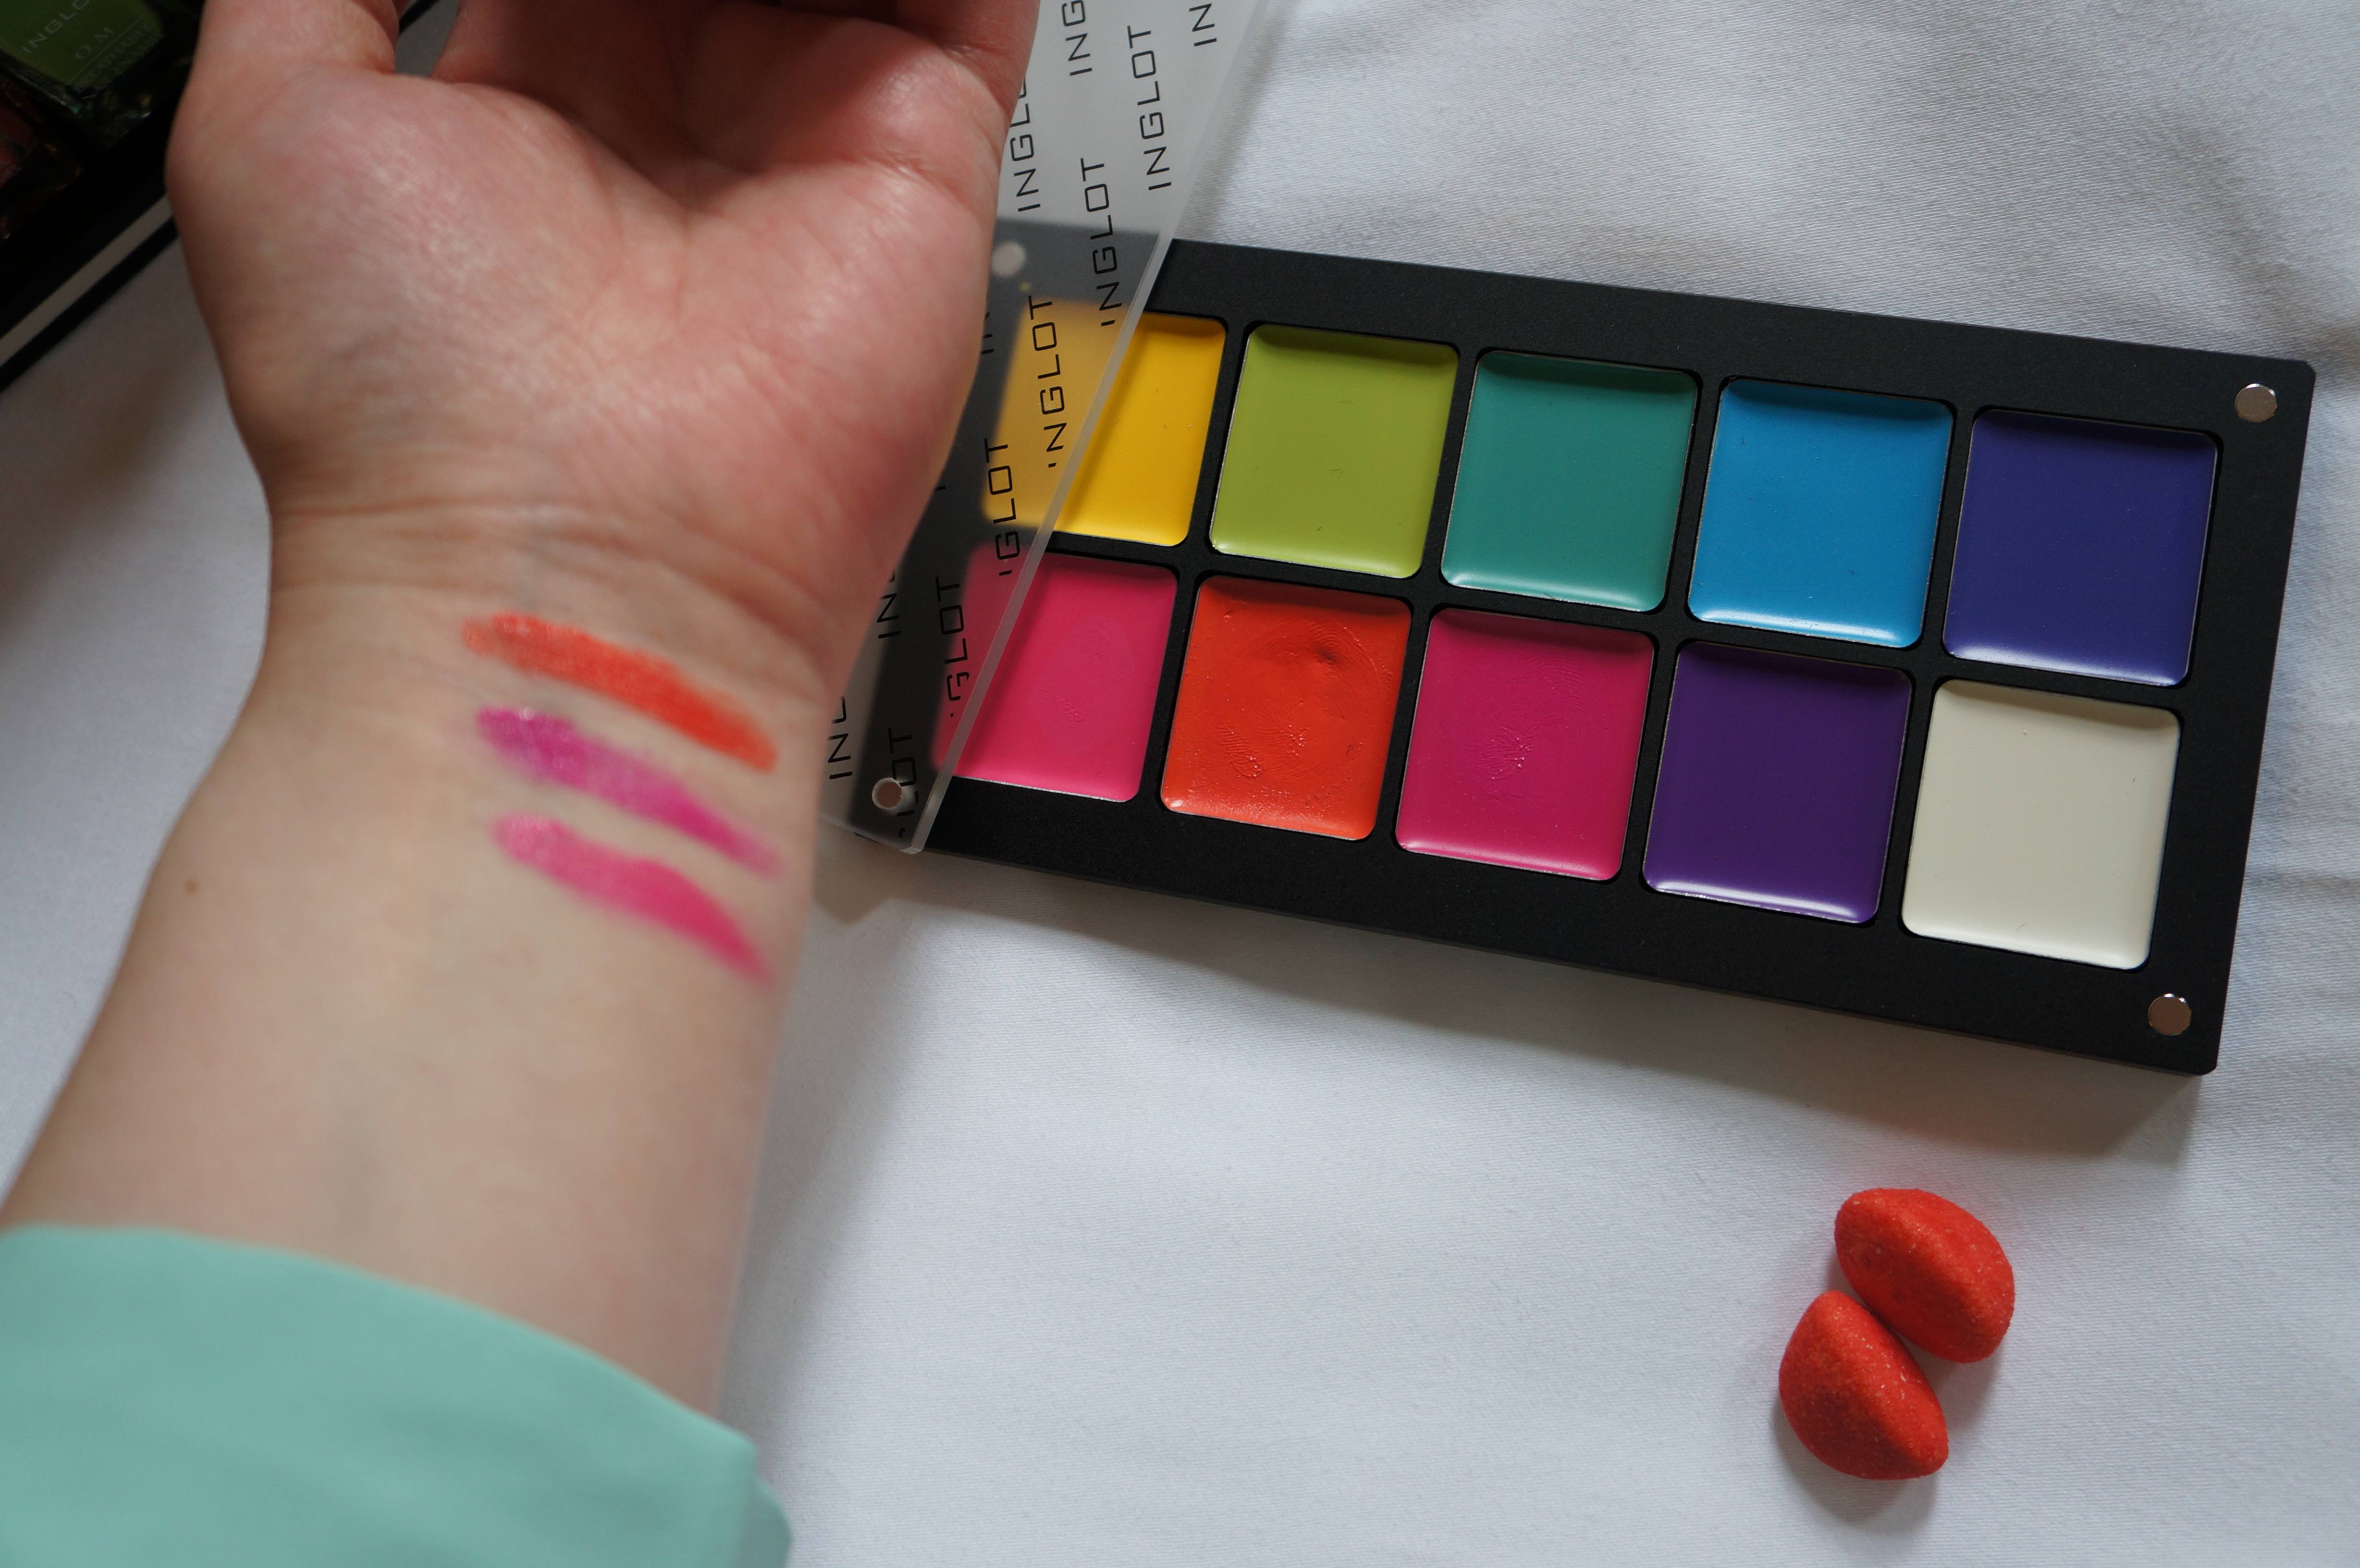 Inglot Lipstick swatches/ Pic by kiwikoo